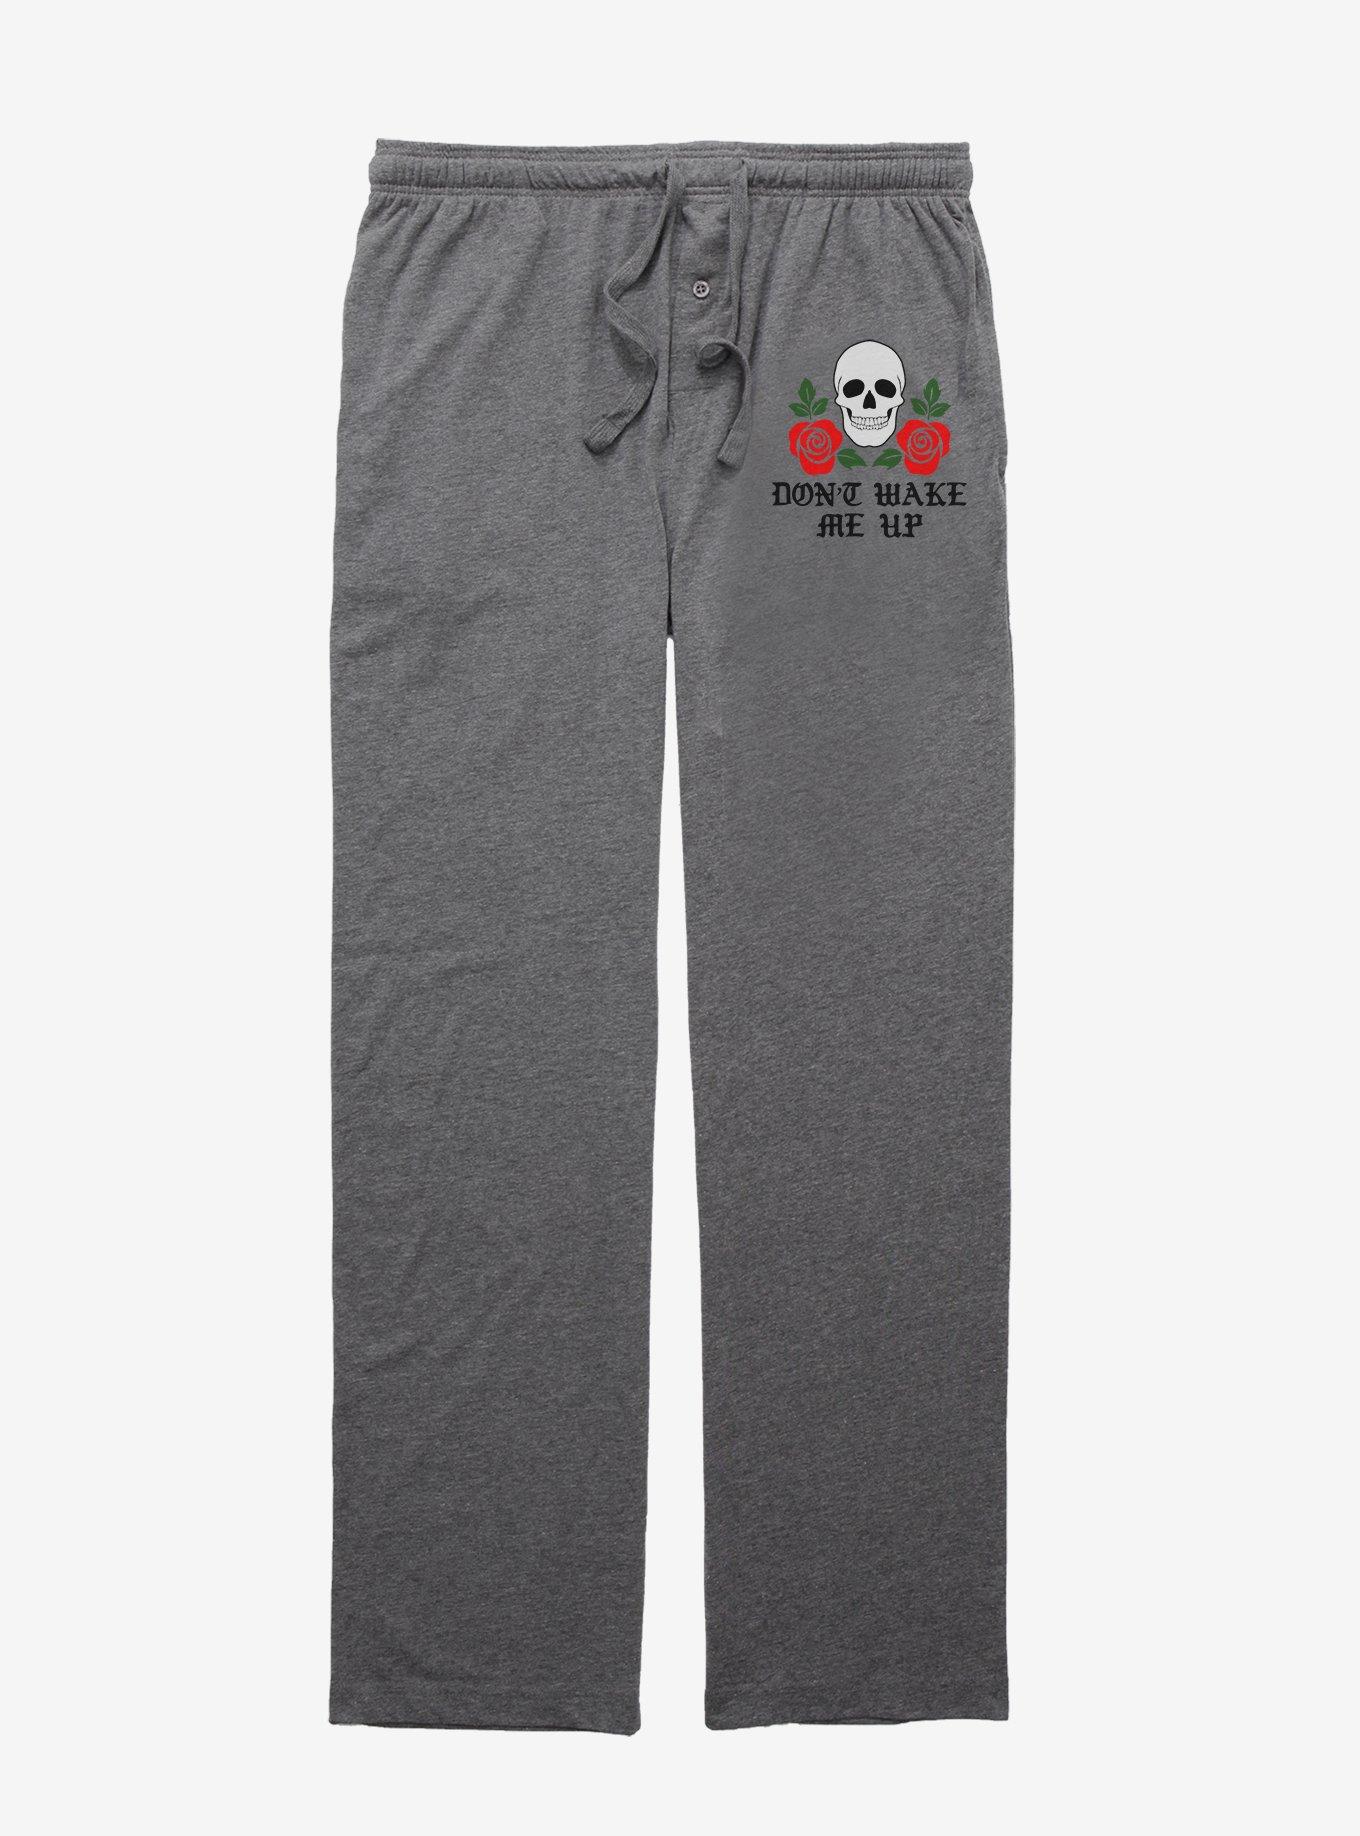 Cozy Collection Don't Wake Me Up Pajama Pants, GRAPHITE HEATHER, hi-res